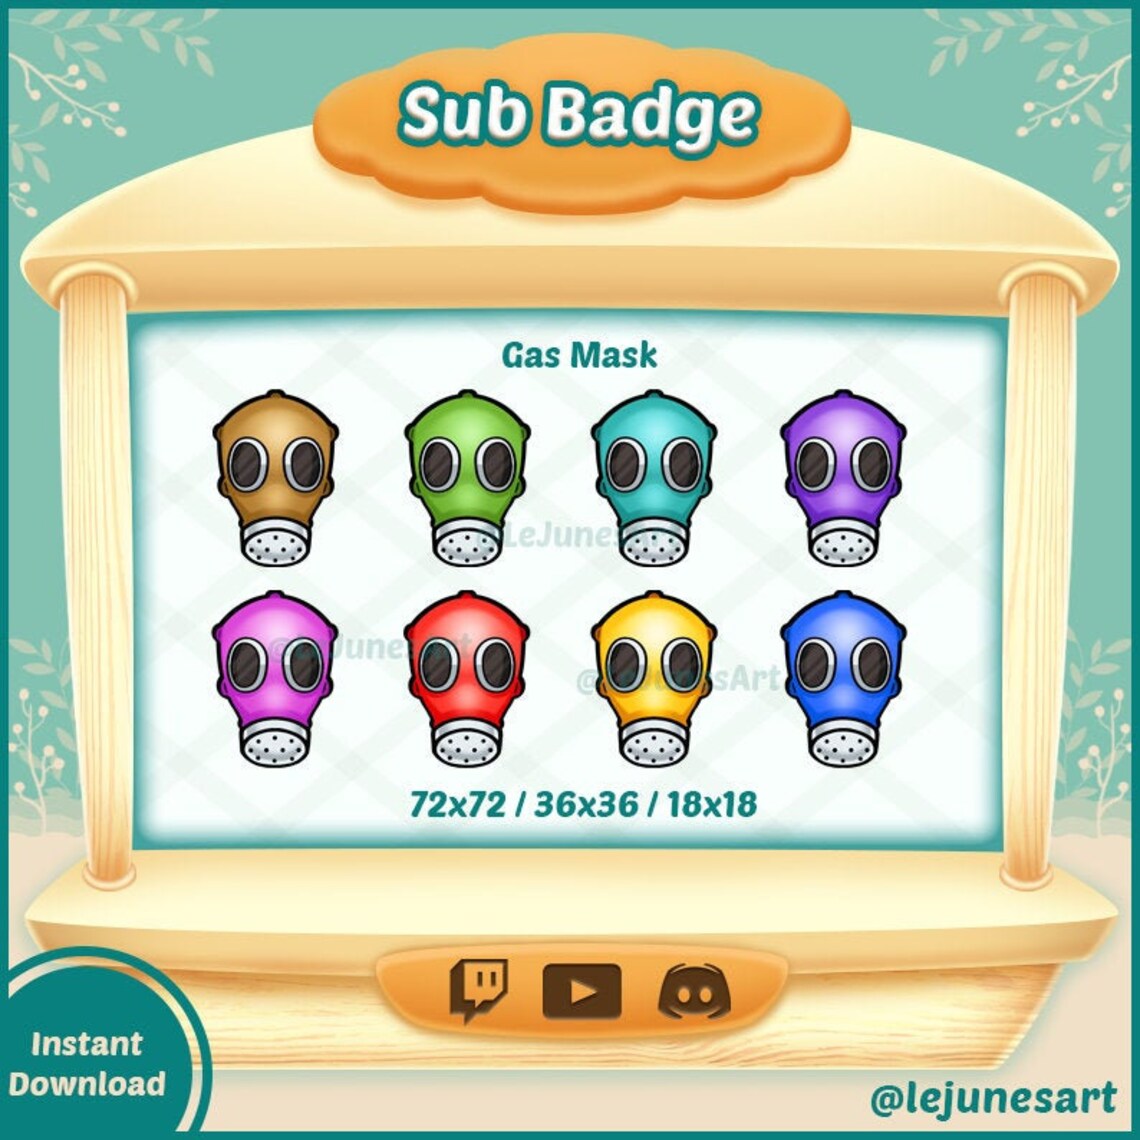 Twitch Gift Sub Badge Not Showing / Twitch Sub Badges